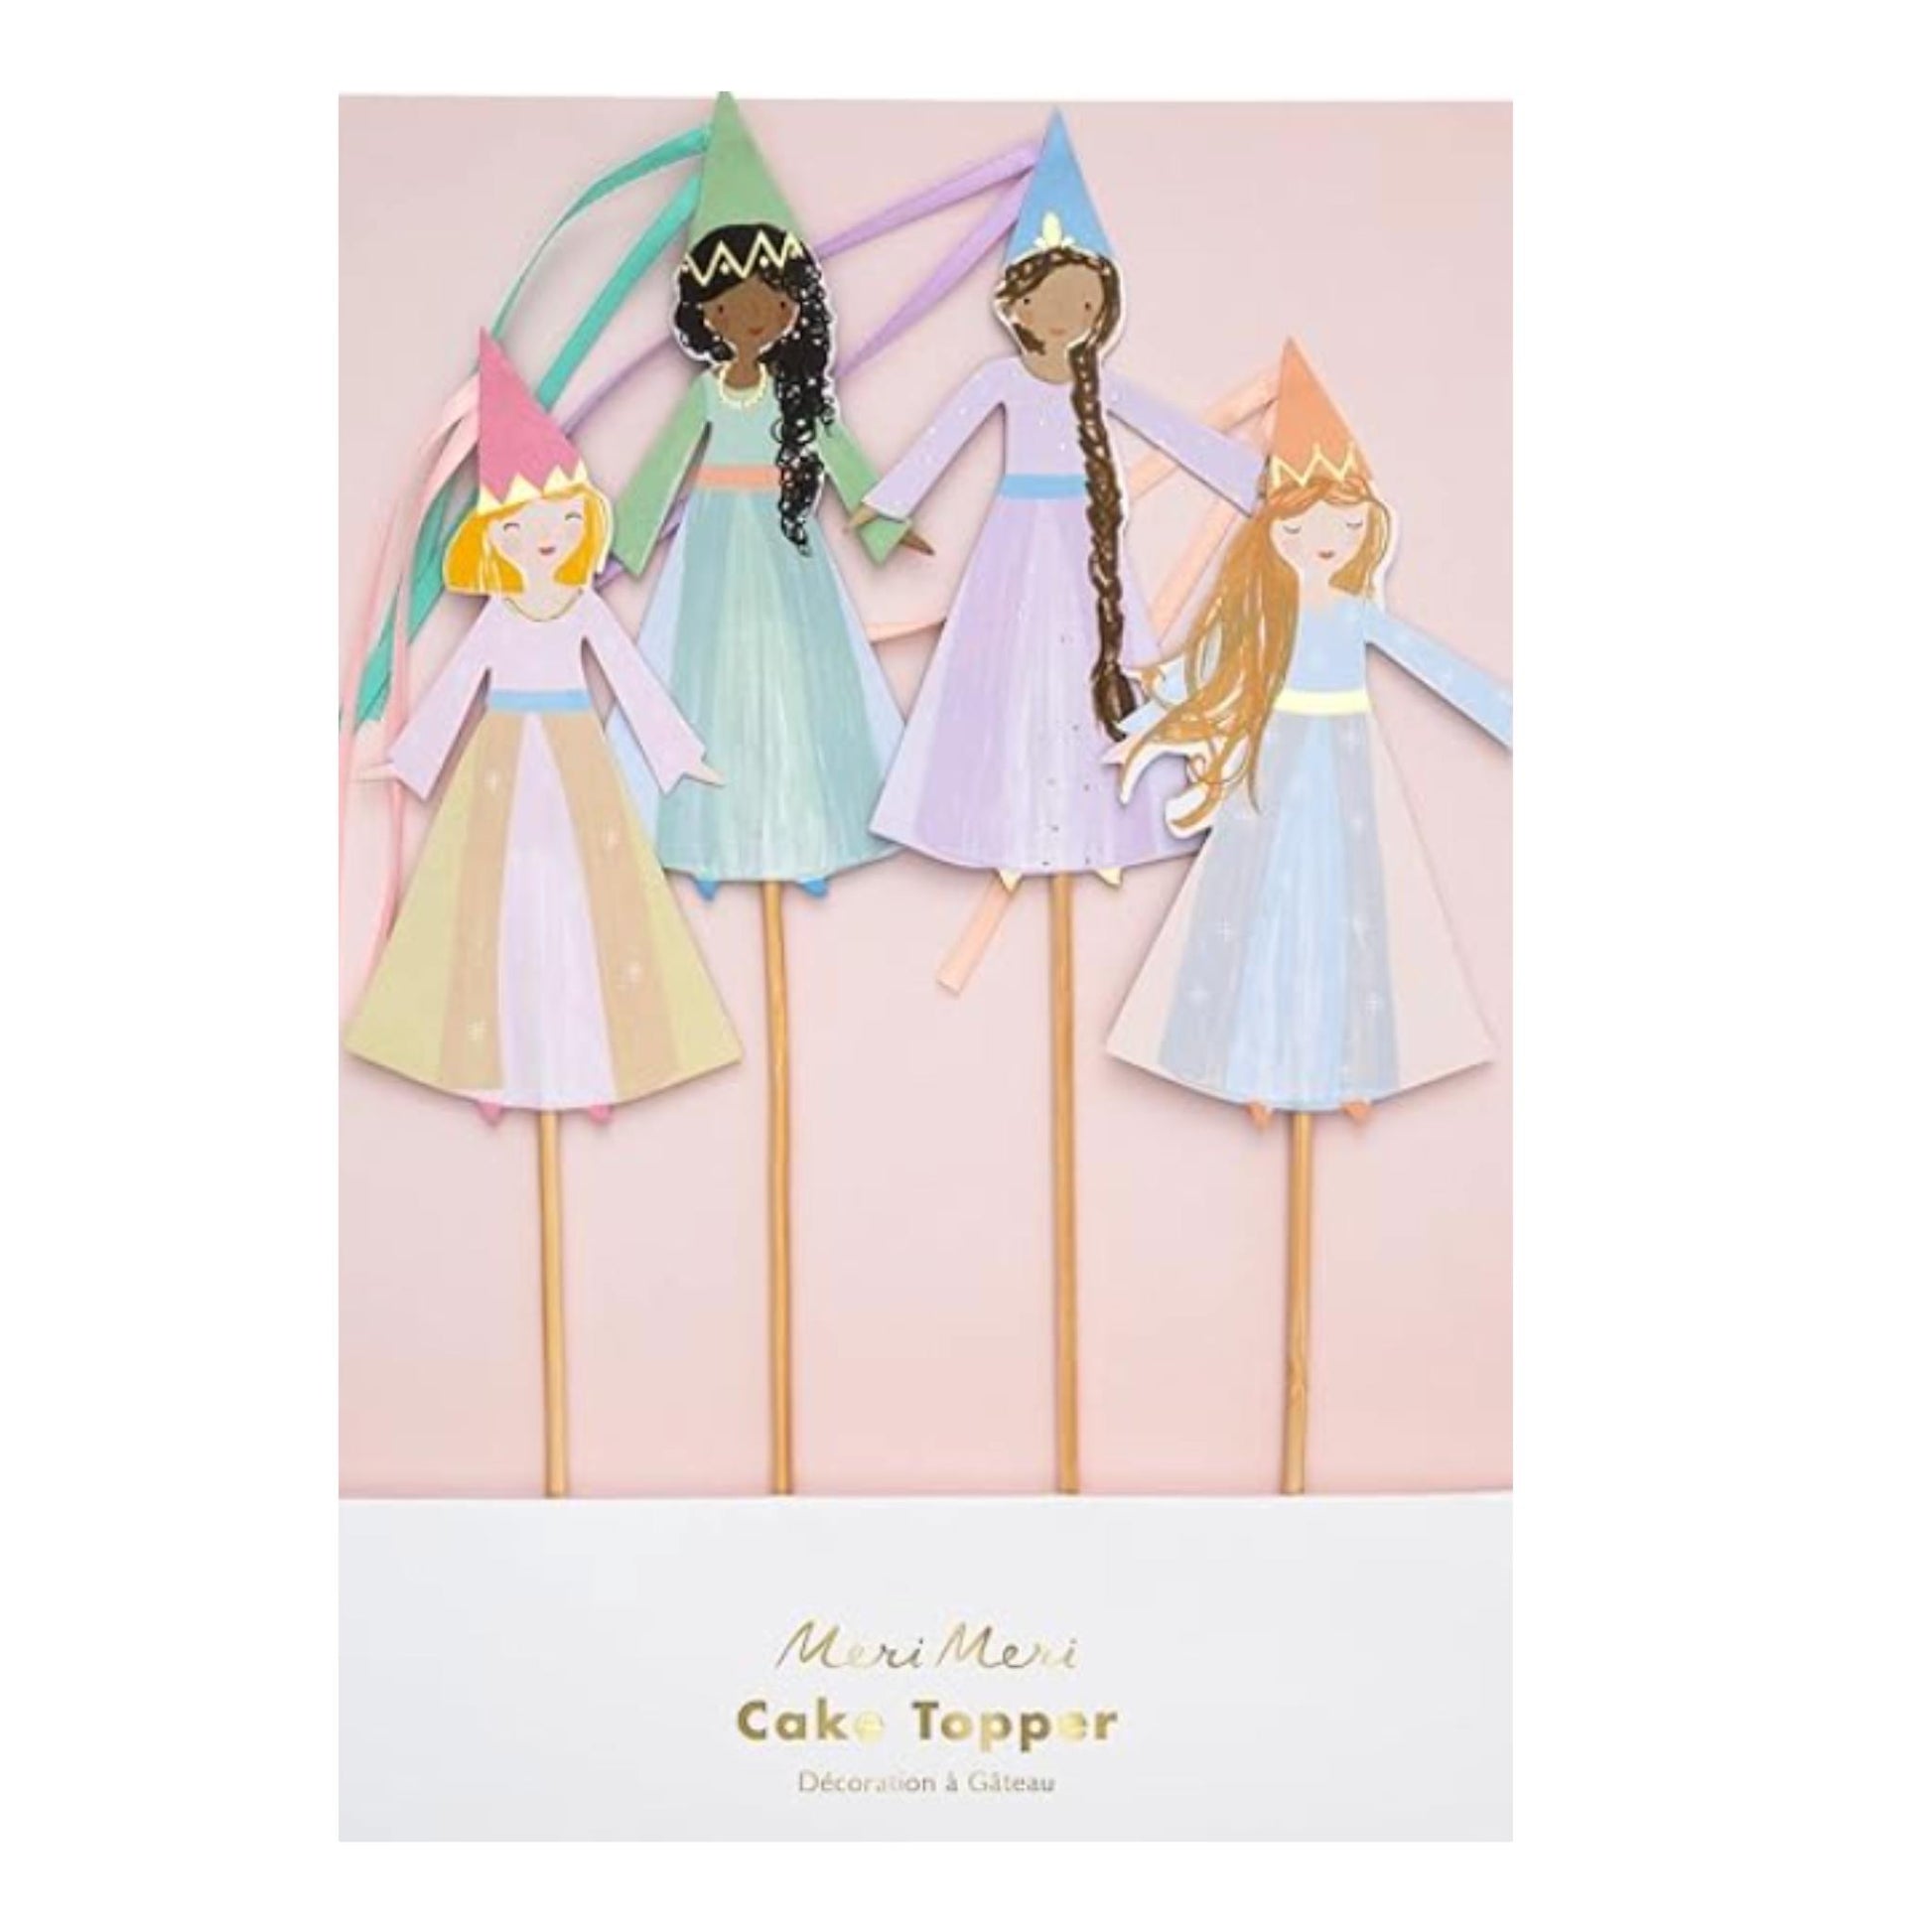 Gorgeous Princess Cake Toppers With Flowing Ribbon In 4 Different Designs & Colours. Eco Friendly